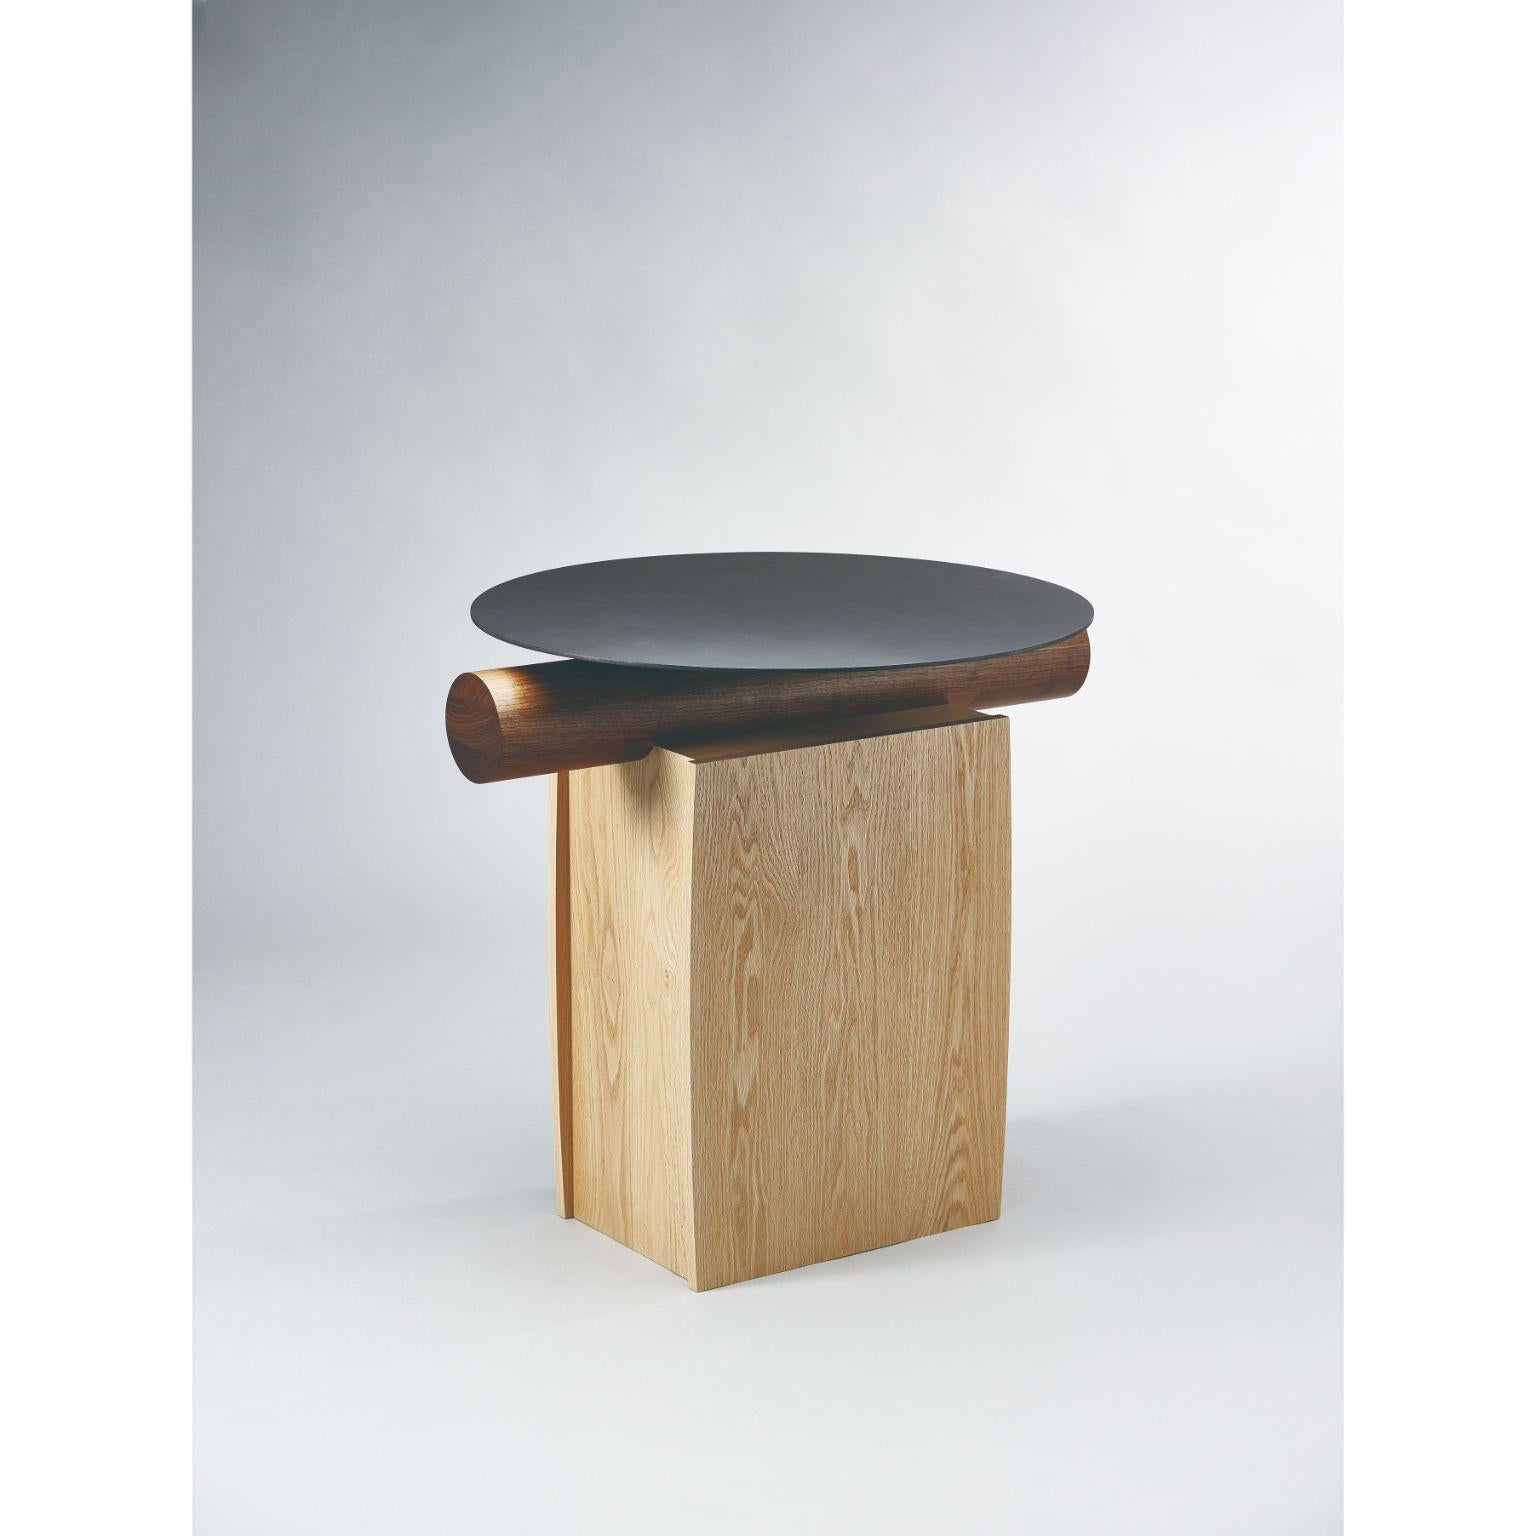 Heritage round table by Lee Jung Hoon
Dimensions: D 80 x W 70 x H 472.4 cm
Materials: Red oak, walnut, stainless steel, Corrosion

The Heritage series, created by designer Lee Jung-hoon is a collection of sculptural modern furniture. The designs